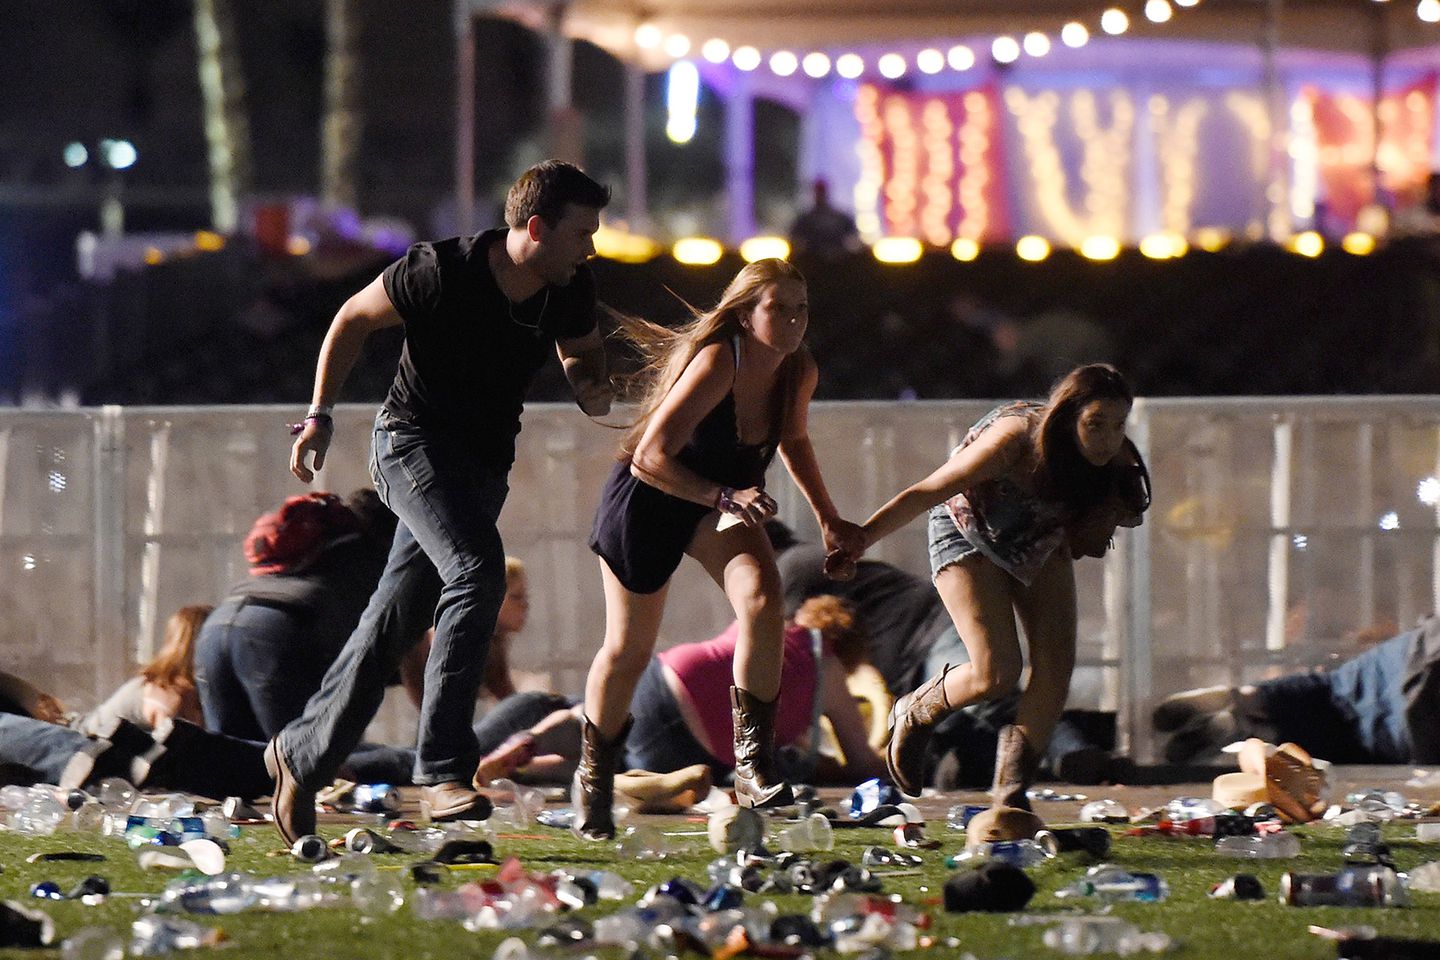 David Becker tells the tale of terror during the Las Vegas mass shooting at a country music festival – The Washington Post